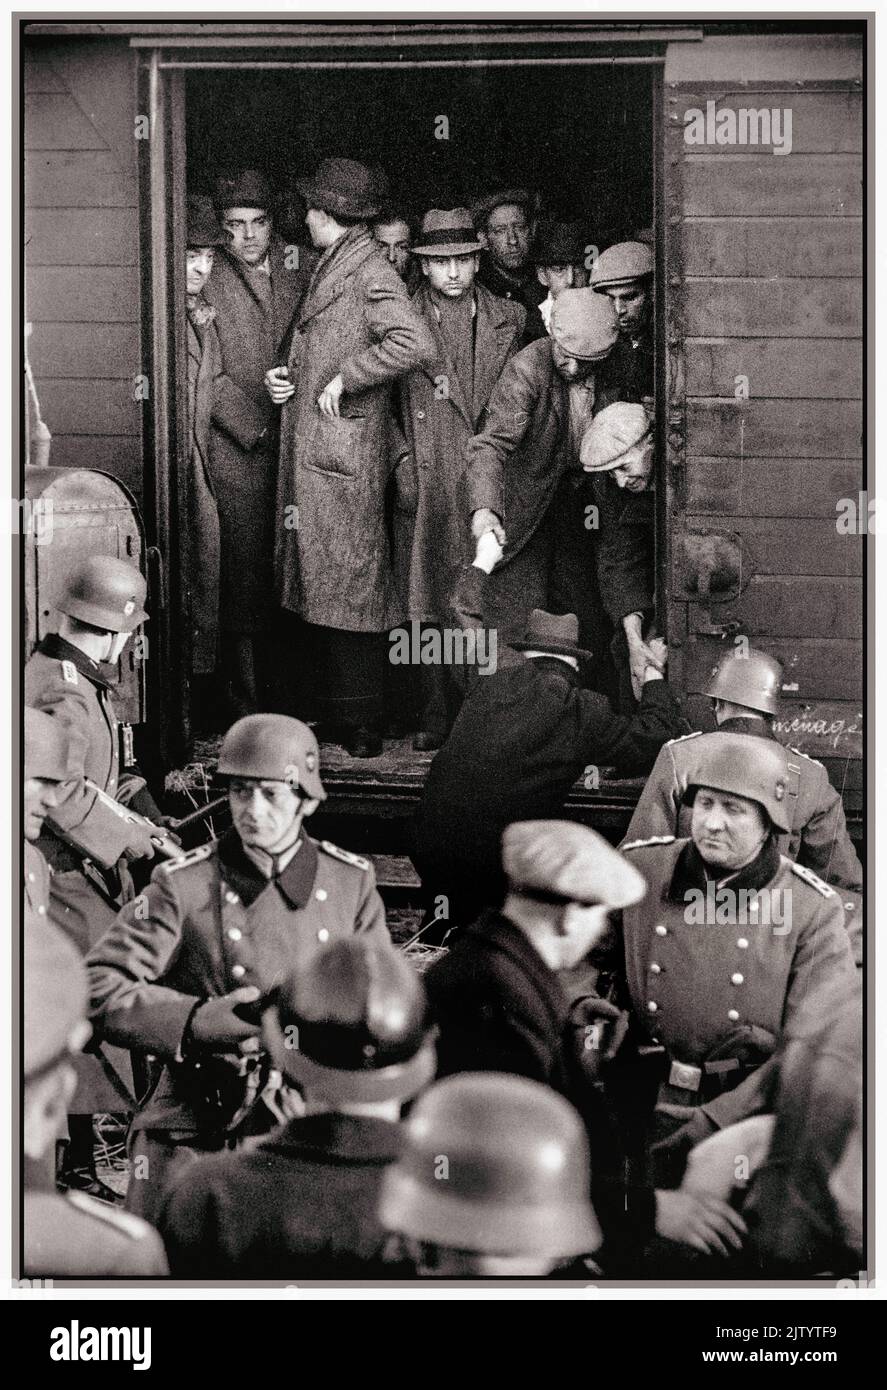 WW2 1943 Deportation of Jewish men from Marseilles Old Port Gare d'Arenc France. Under the collaboration of Vichy & Nazi regime of  occupied France, energetically assisted by the Vichy French Police. Ordered directly by Himmler. Südfrankreich, Marseille, Güterbahnhof Gare d'Arenc.- Deportation von Juden unter Bewachung des SS-Polizeiregiments Griese und französischer Polizei. Vichy France Stock Photo